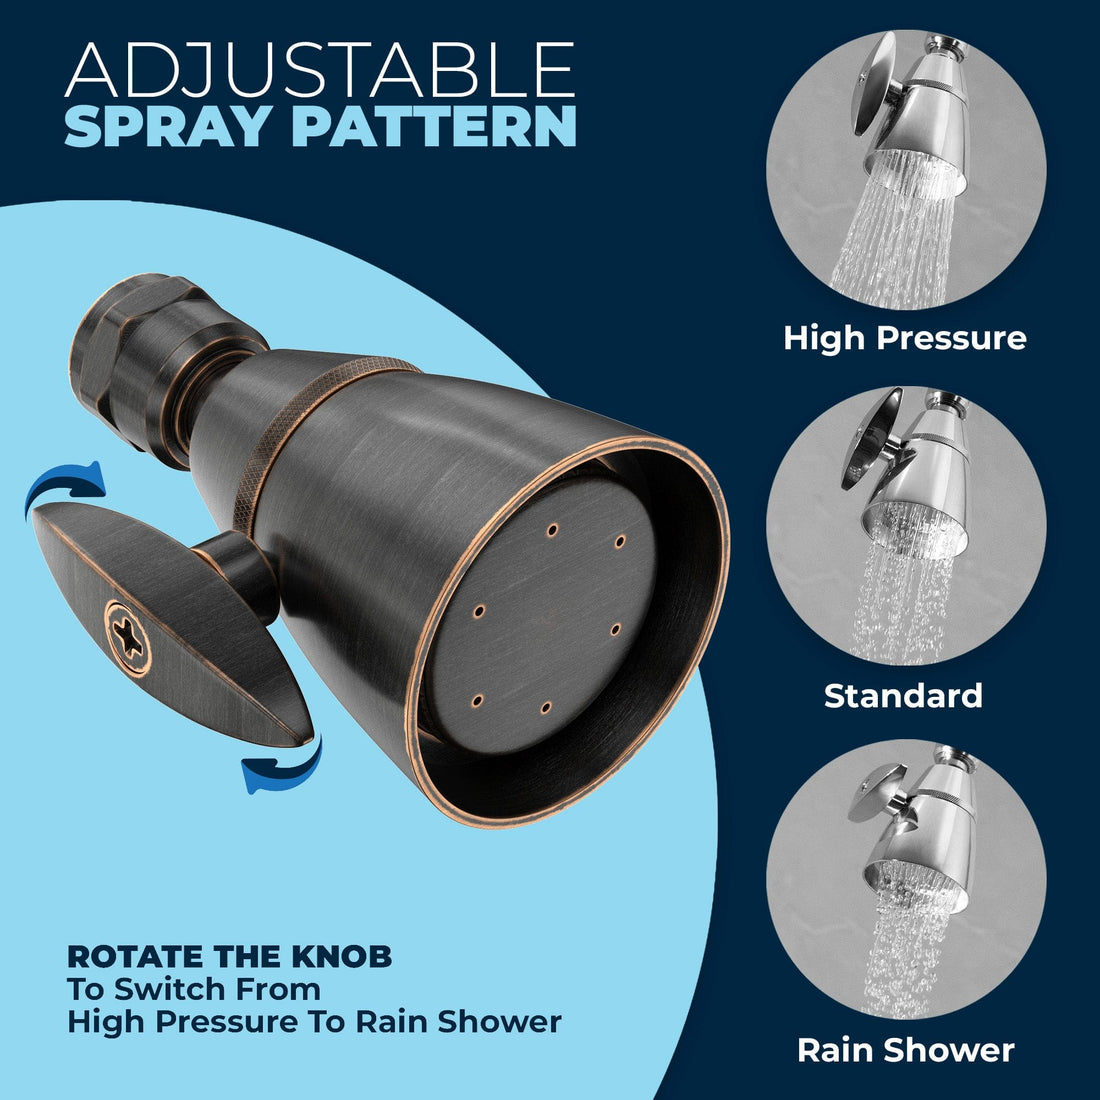 Spray Adjustment 2 Variable Spray Pattern Fixed Shower Head from High Pressure to Rain Showerhead Oil Rubbed Bronze / 2.5 - The Shower Head Store